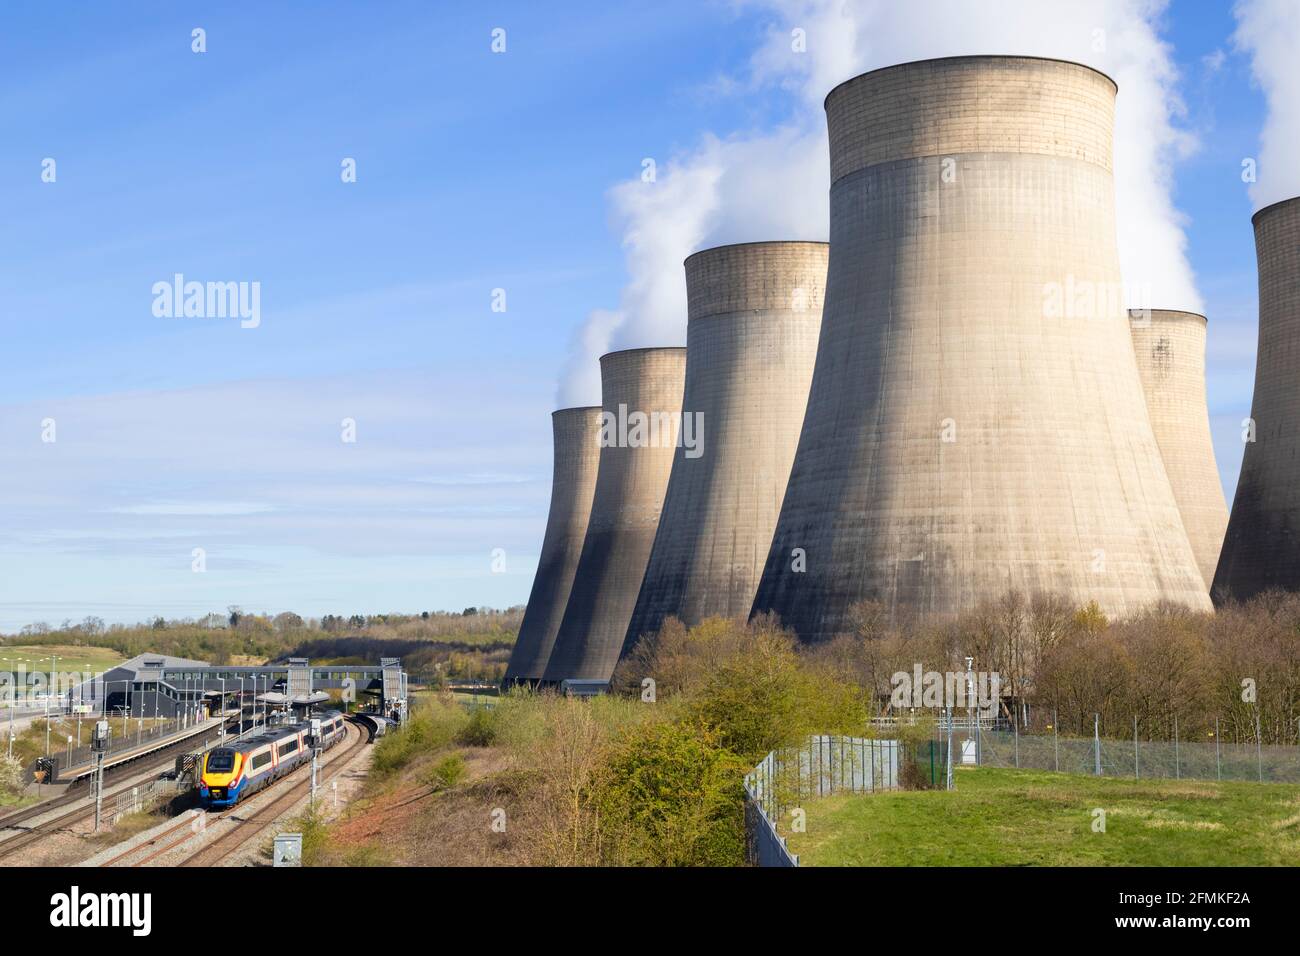 Ratcliffe-on-Soar coal power station with steam from cooling towers and a train at Parkway station Ratcliffe on soar Nottinghamshire England Stock Photo